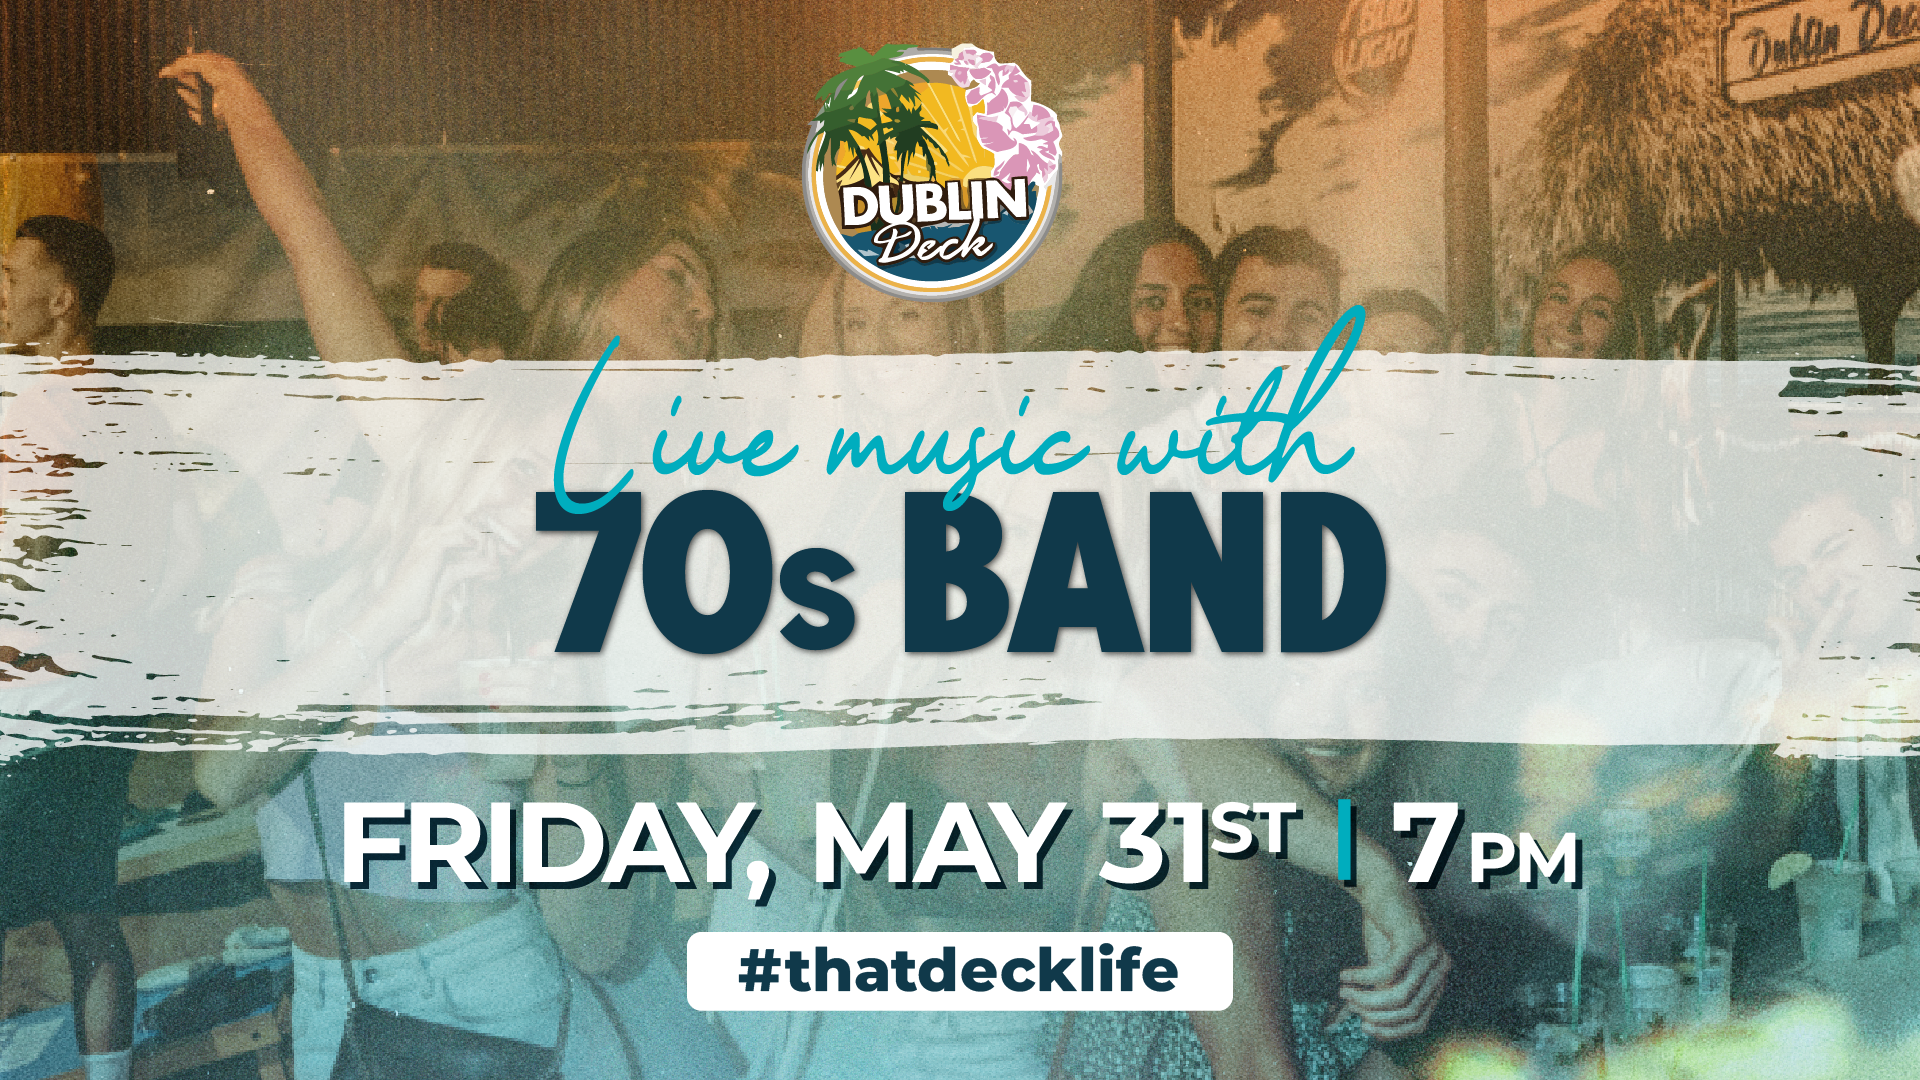 flyer for live music by 70's band on may 31st at 7pm